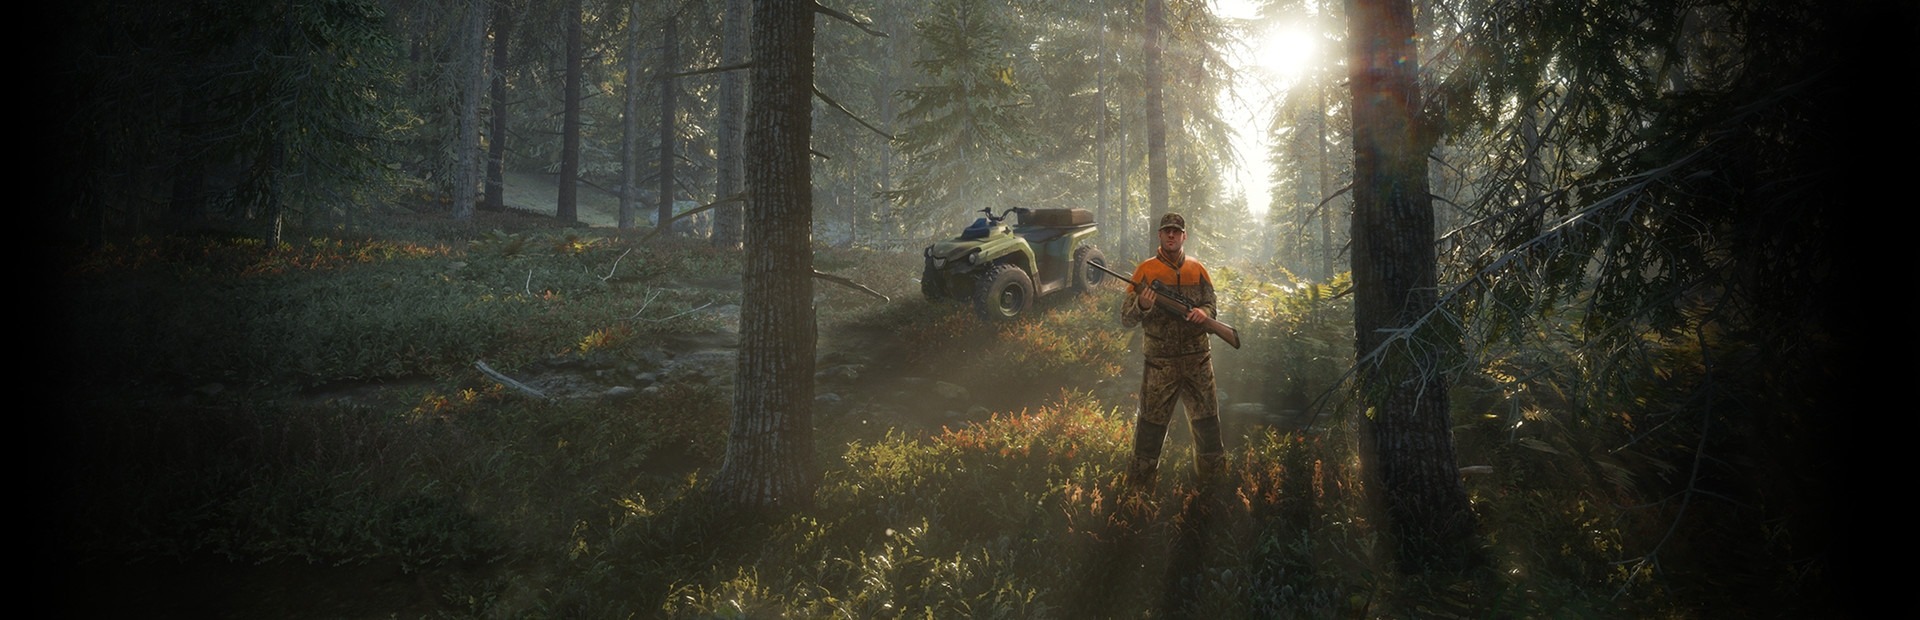 Banner TheHunter: Call of the Wild - Treestand & Tripod Pack